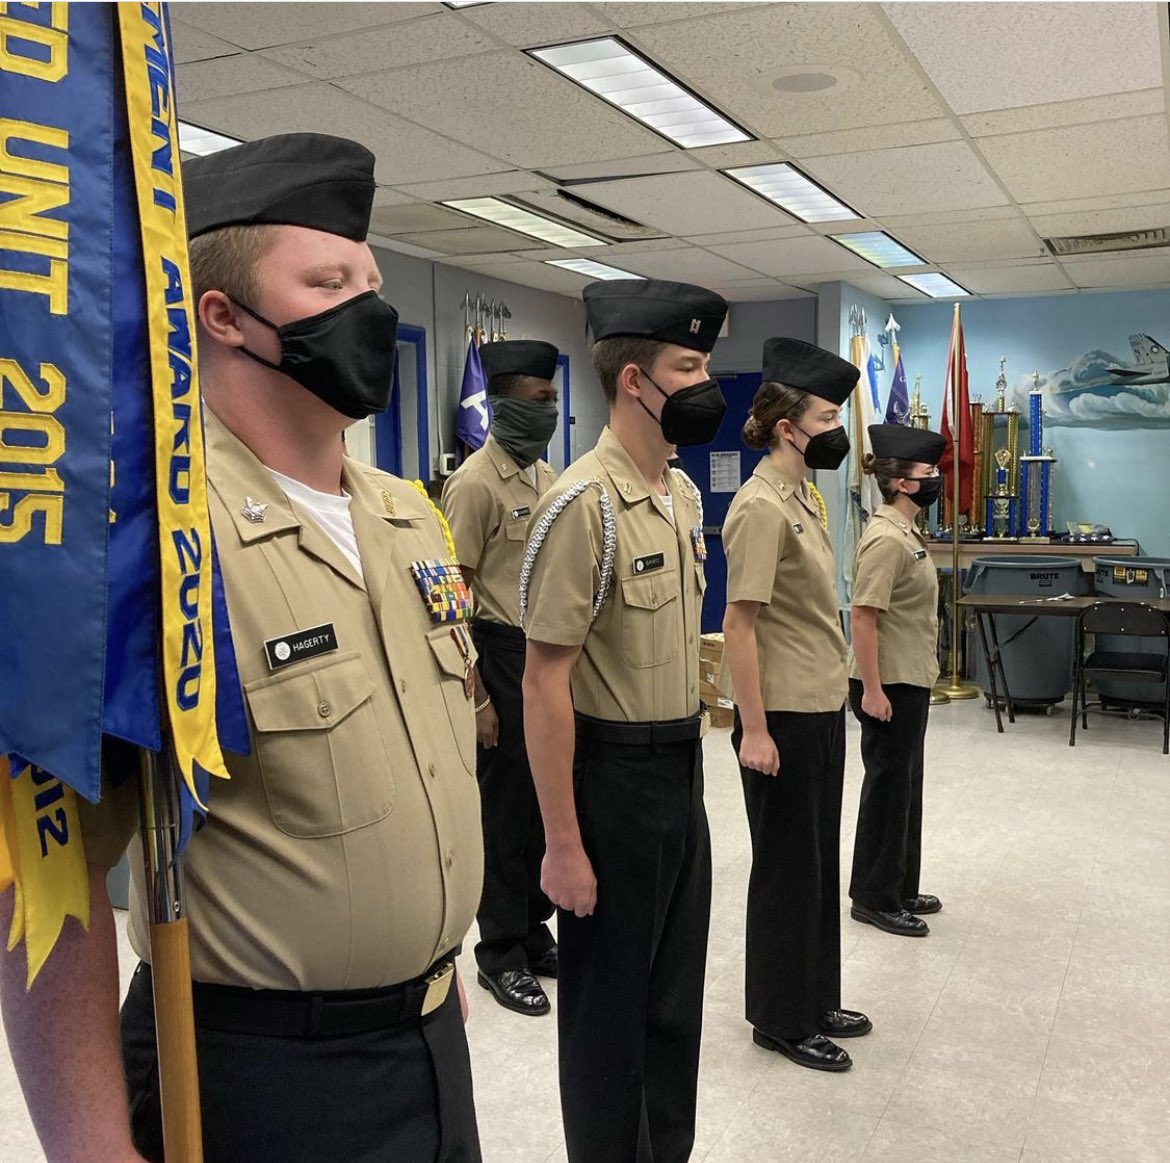 Leadership by example, every Wednesday Cadet staff members are inspected before school.  This ensures they adhere to Navy standards and set a good example for the junior cadets.  #navy #navyjrotc #njrotc #FullSteamAhead #leadership #settheexample #leadershipbyexample